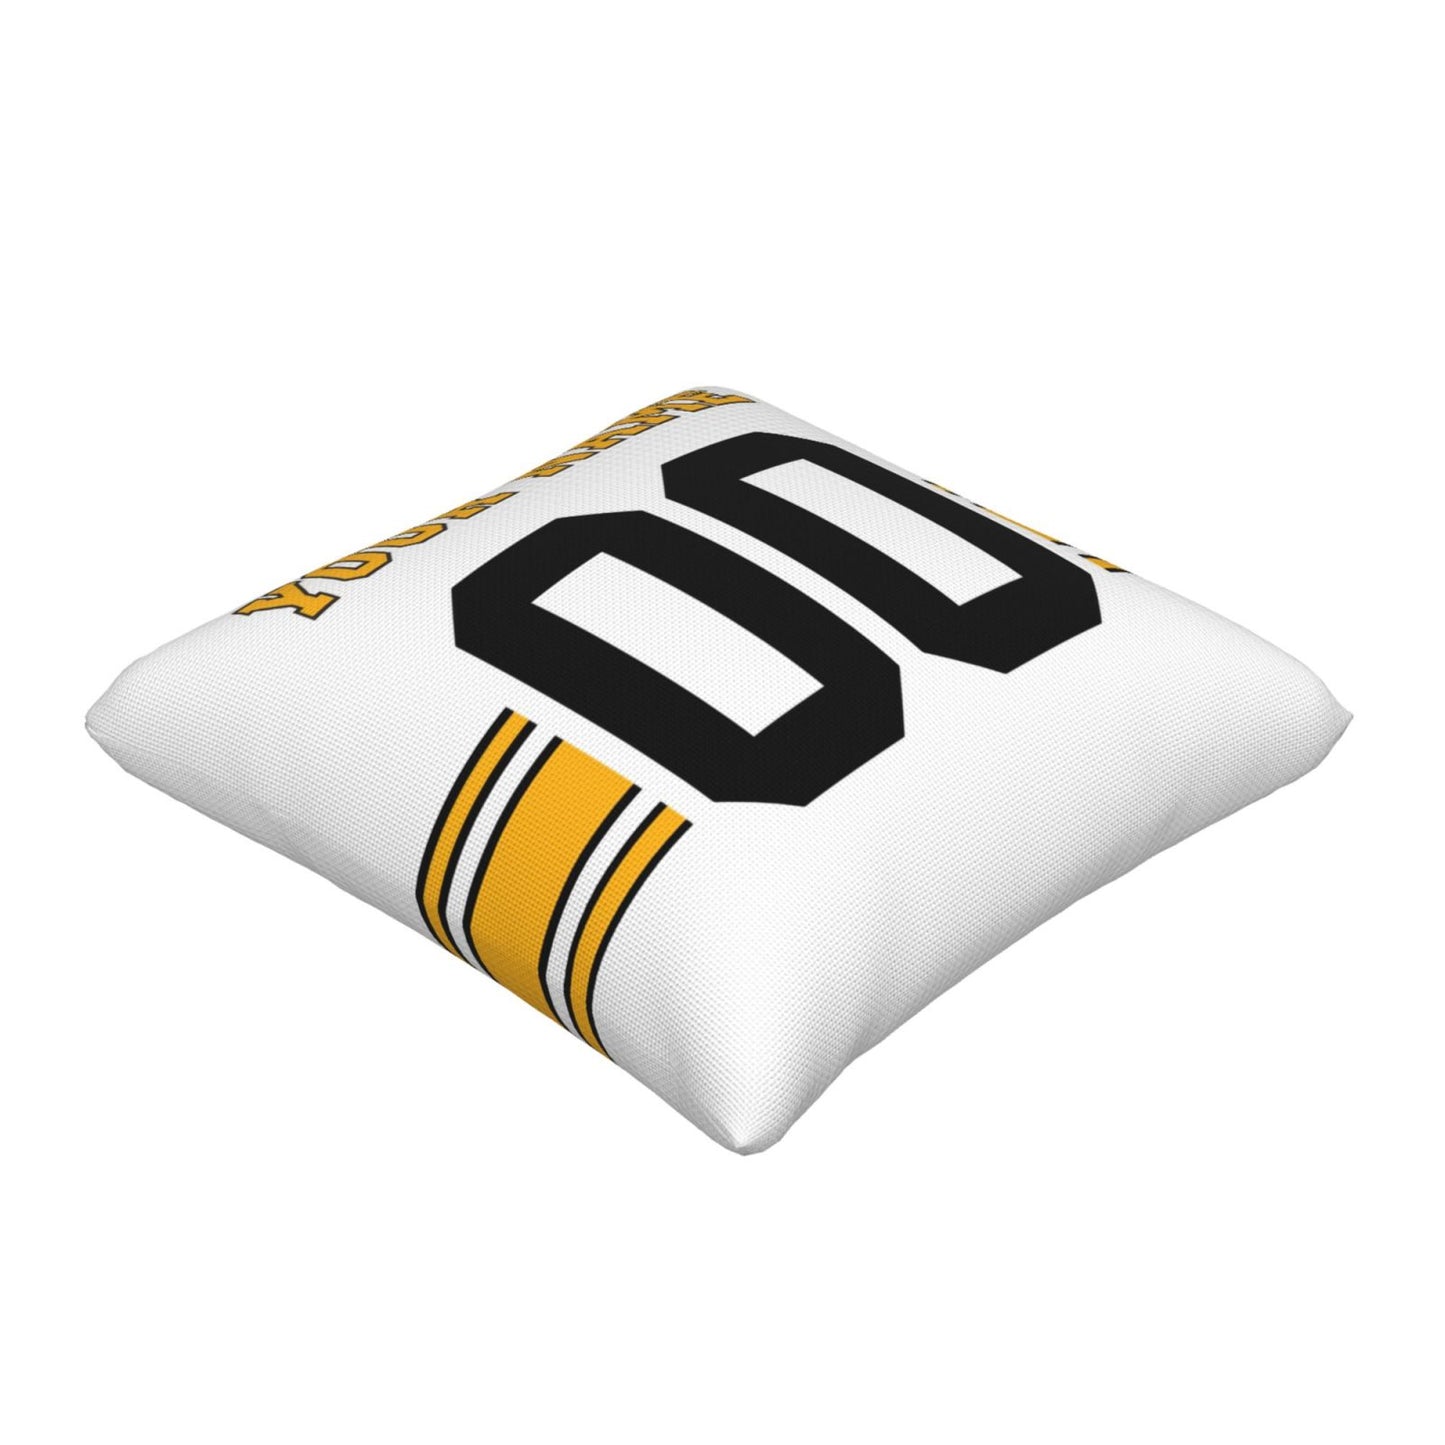 Custom White Pittsburgh Steelers Decorative Throw Pillow Case - Print Personalized Football Team Fans Name & Number Birthday Gift